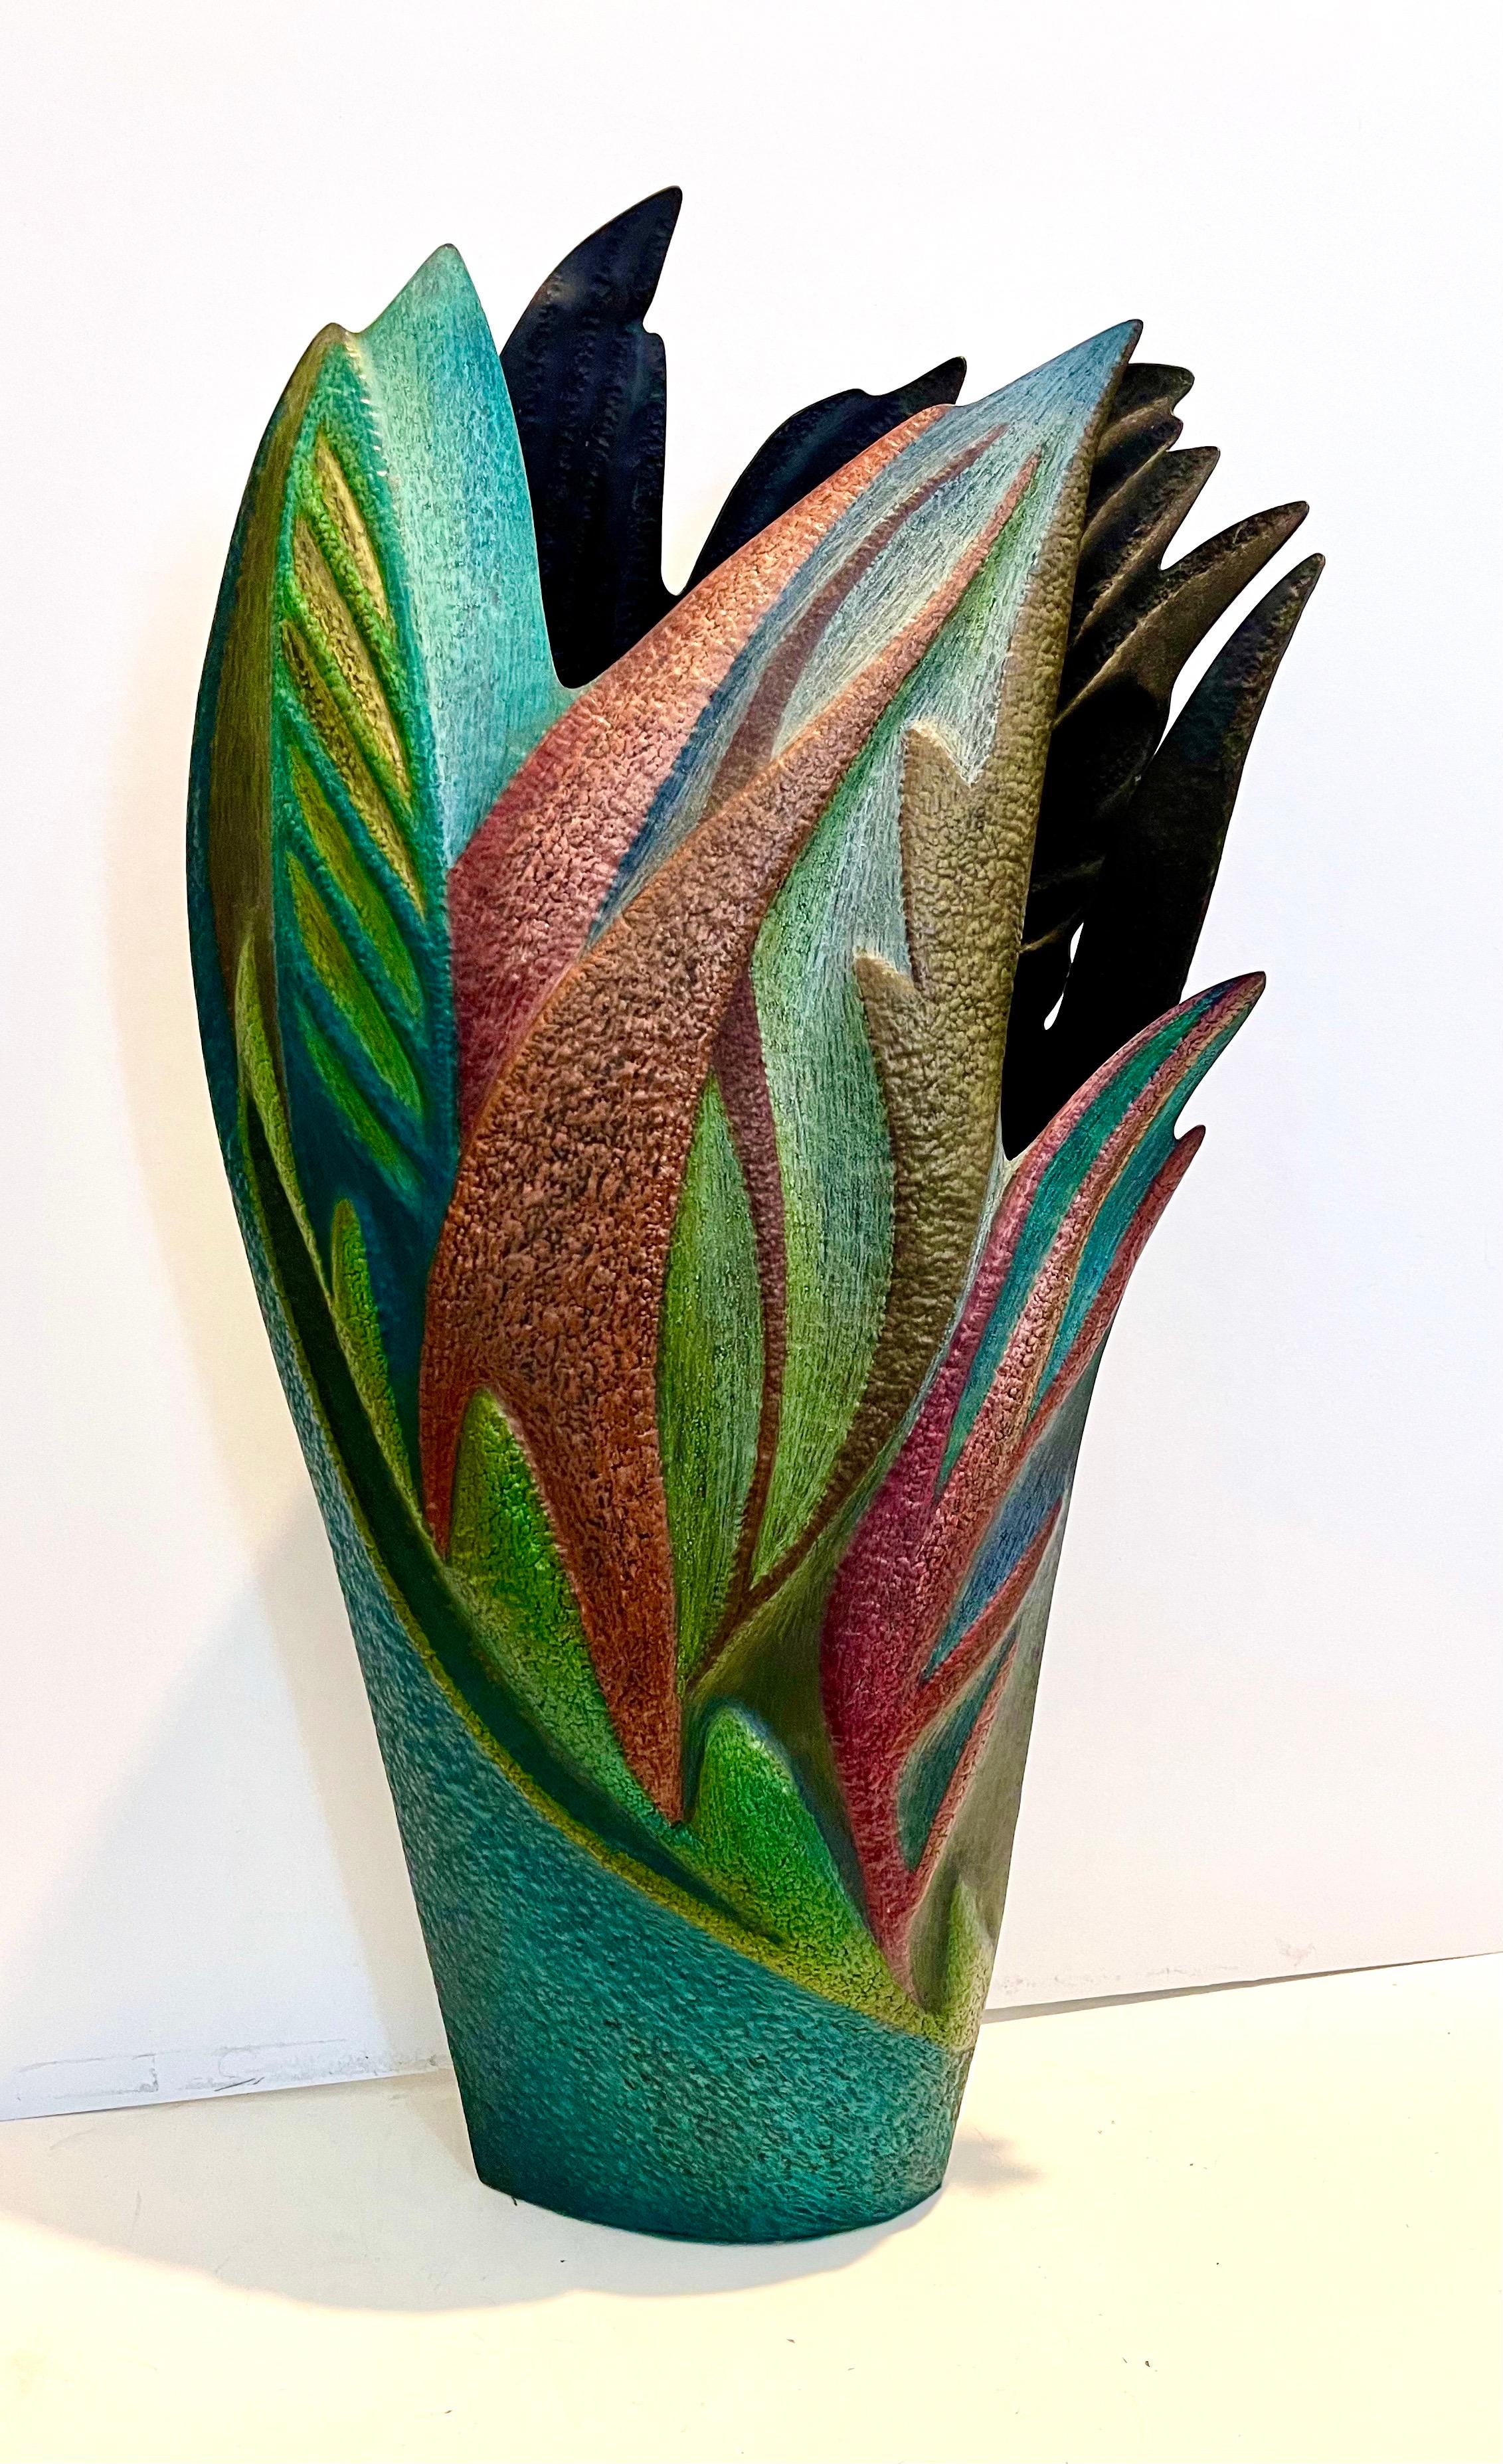 Title: Red Pod, CV110V,
San Diego, 1997
Fabricated, hammered copper, colored pencils, patina.
This is not signed. It bears a label on the interior and the artist has kindly confirmed the attribution to me. 

Helen Shirk (b.1942 American)  Museum